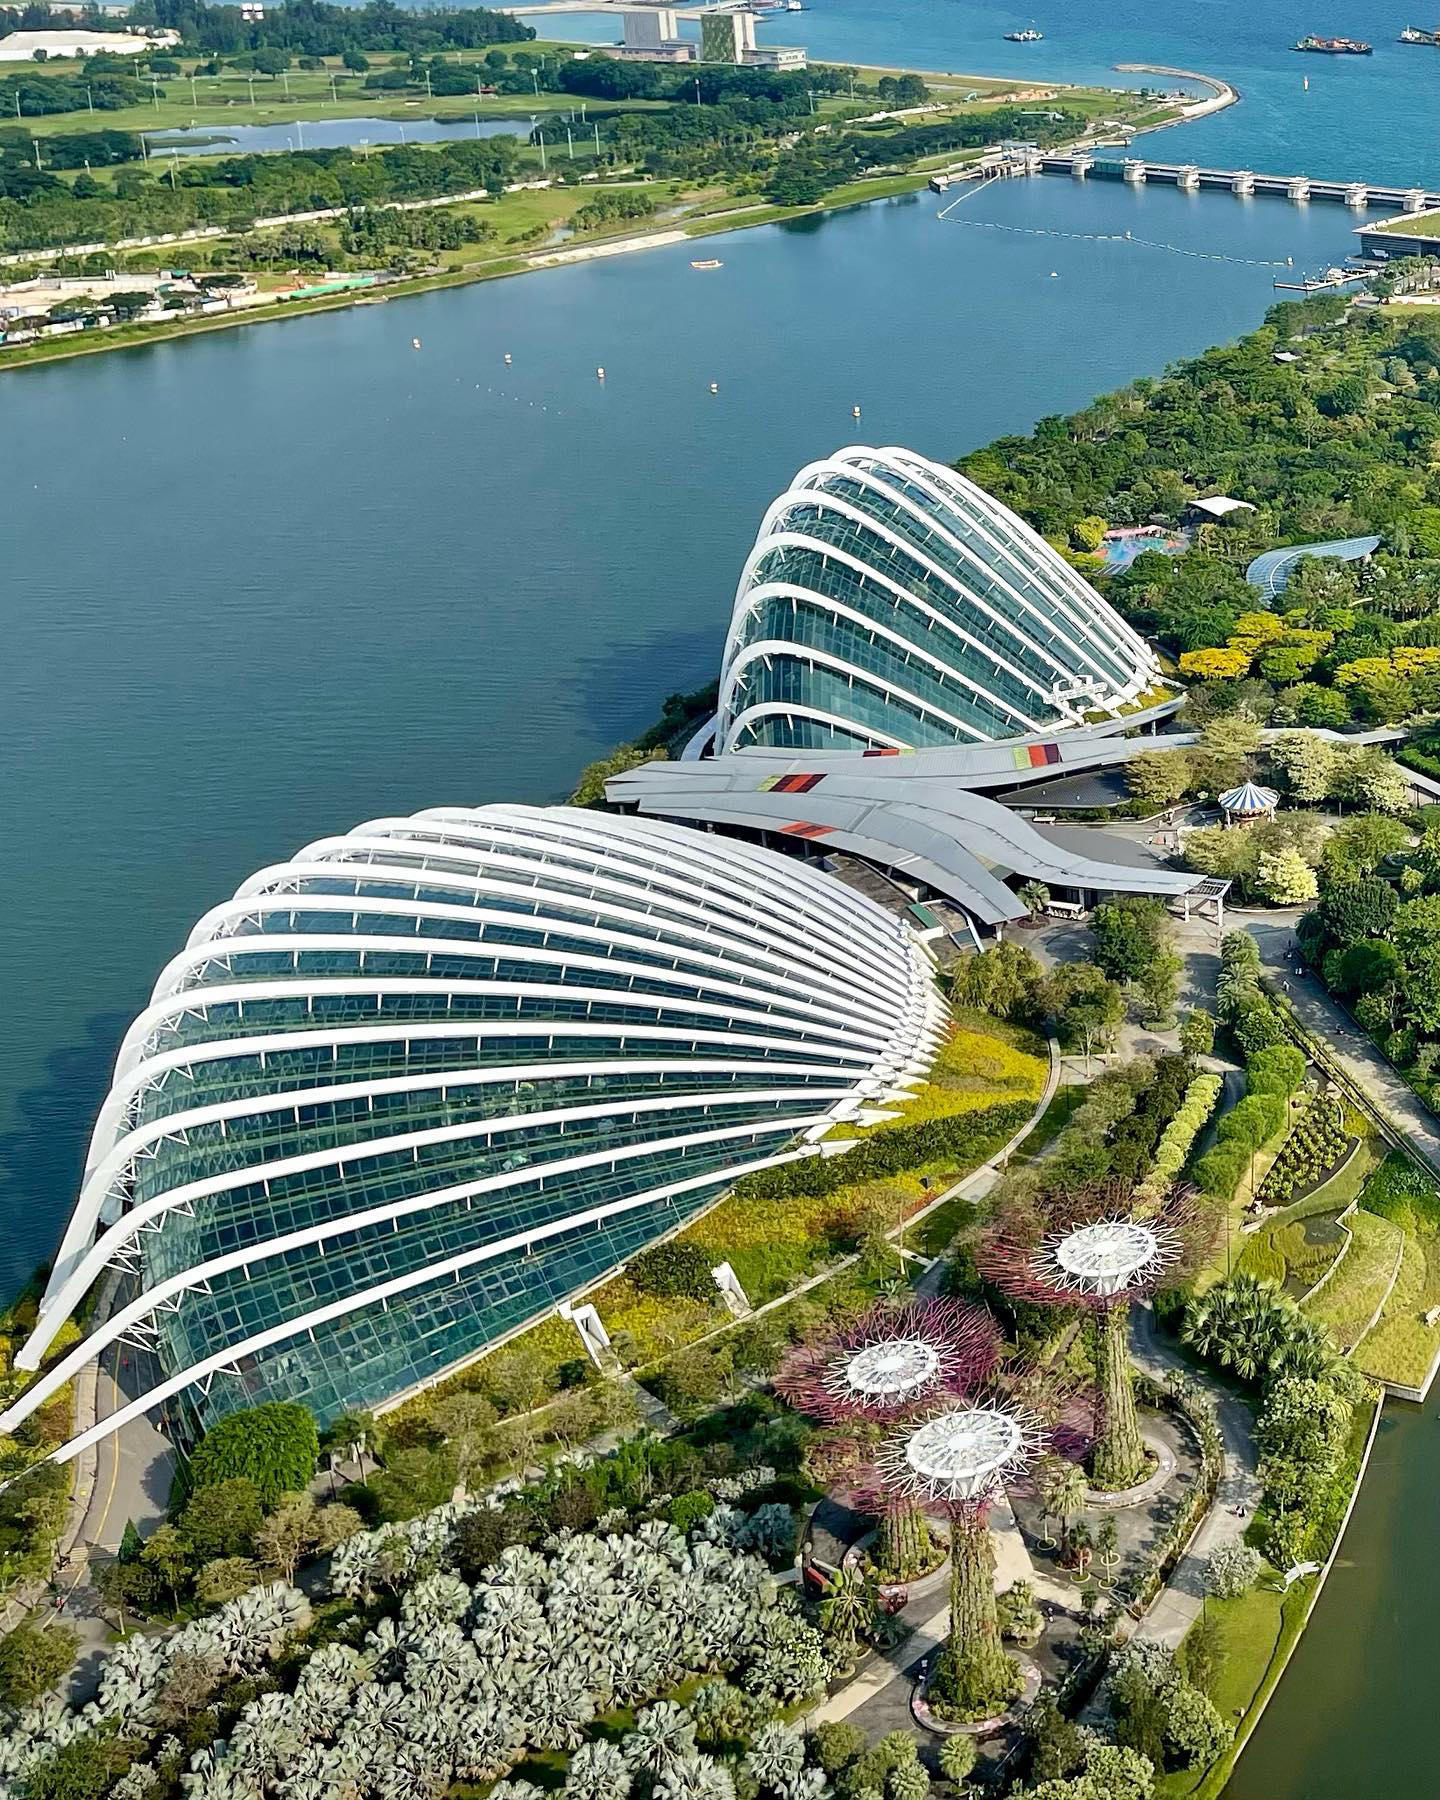 image  1 Singapore 🇸🇬 Travel | Hotels | Food | Tips - Beautiful #gardensbythebay view from high above